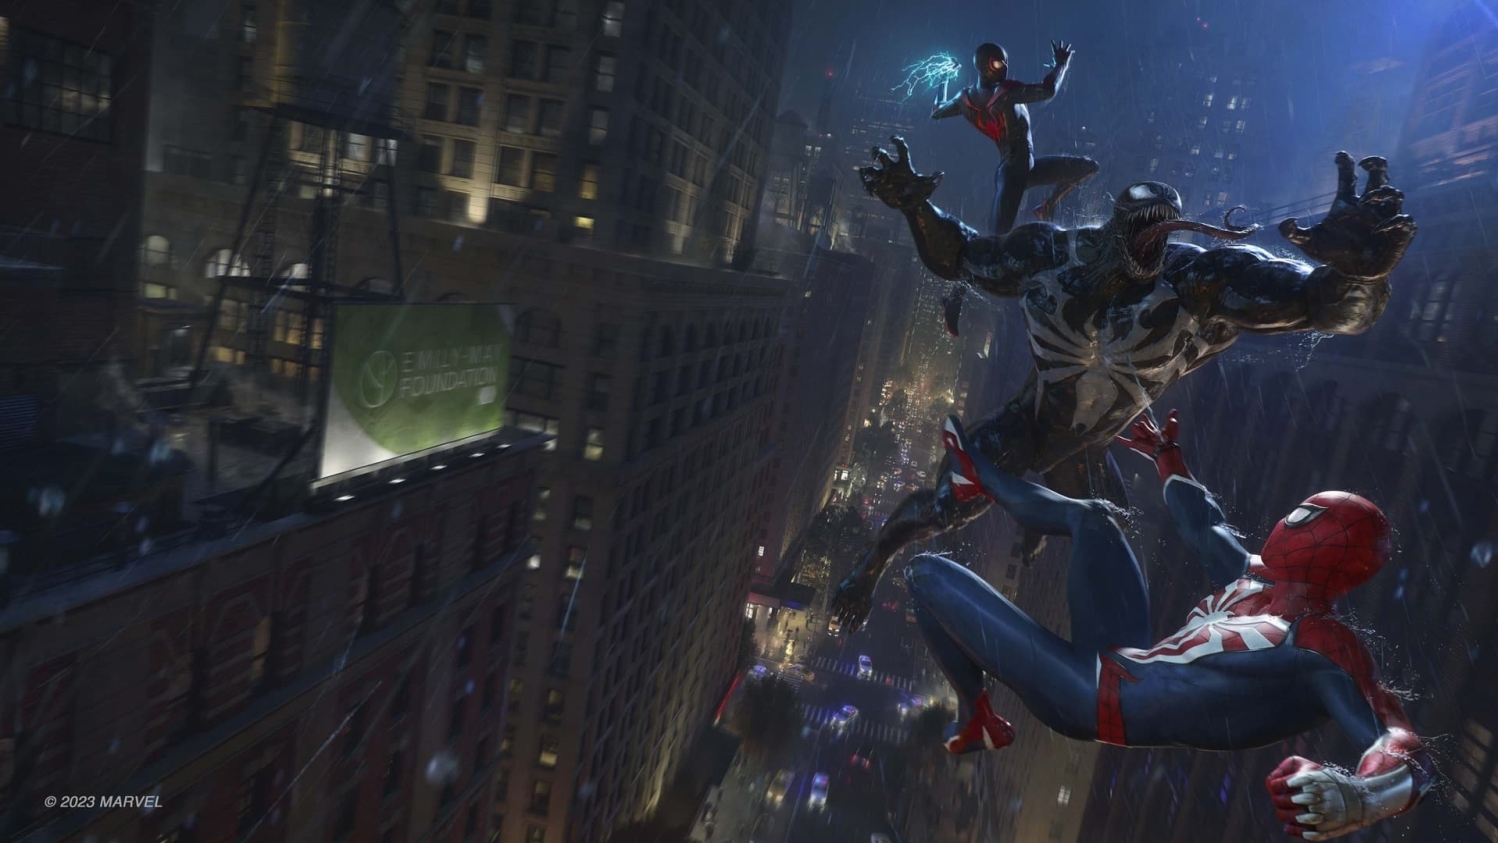 Marvel's Spider-Man 2: PS5 Performance Review 